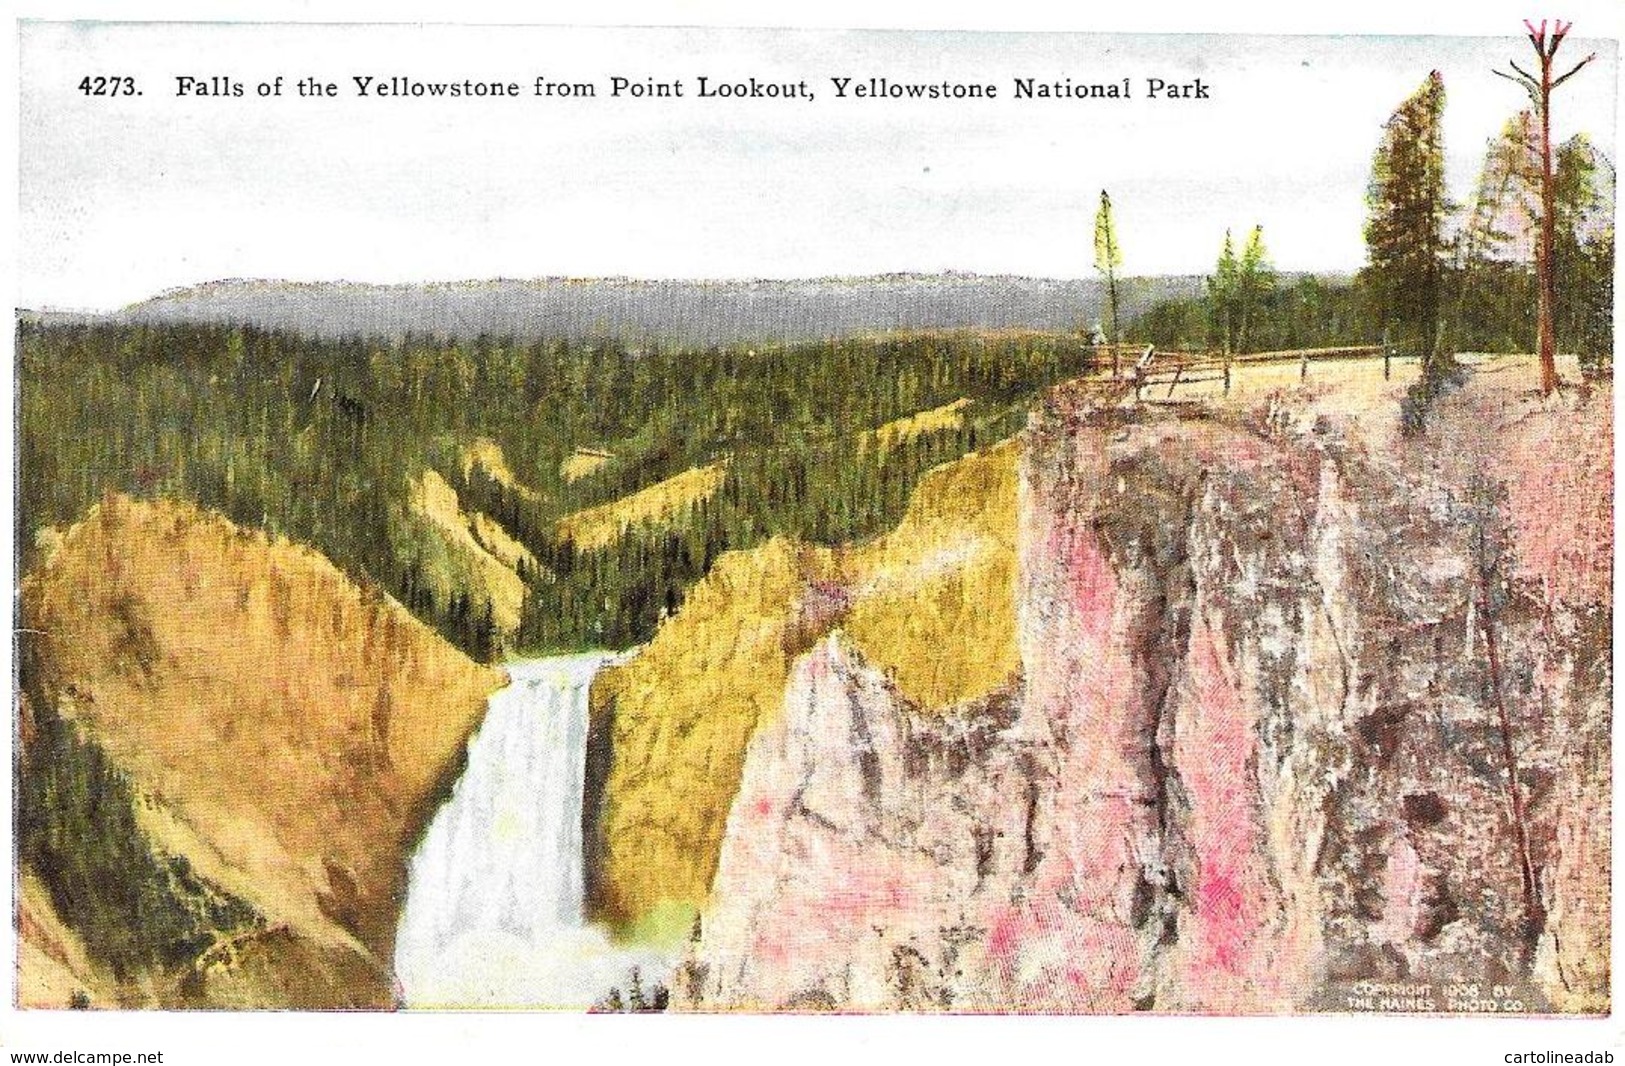 [DC12100] CPA - UNITED STATES - WYOMING - FALLS OF THE YELLOWSTONE FROM POINT LOOKOUT - PERFETTA - Non Viaggiata - Yellowstone